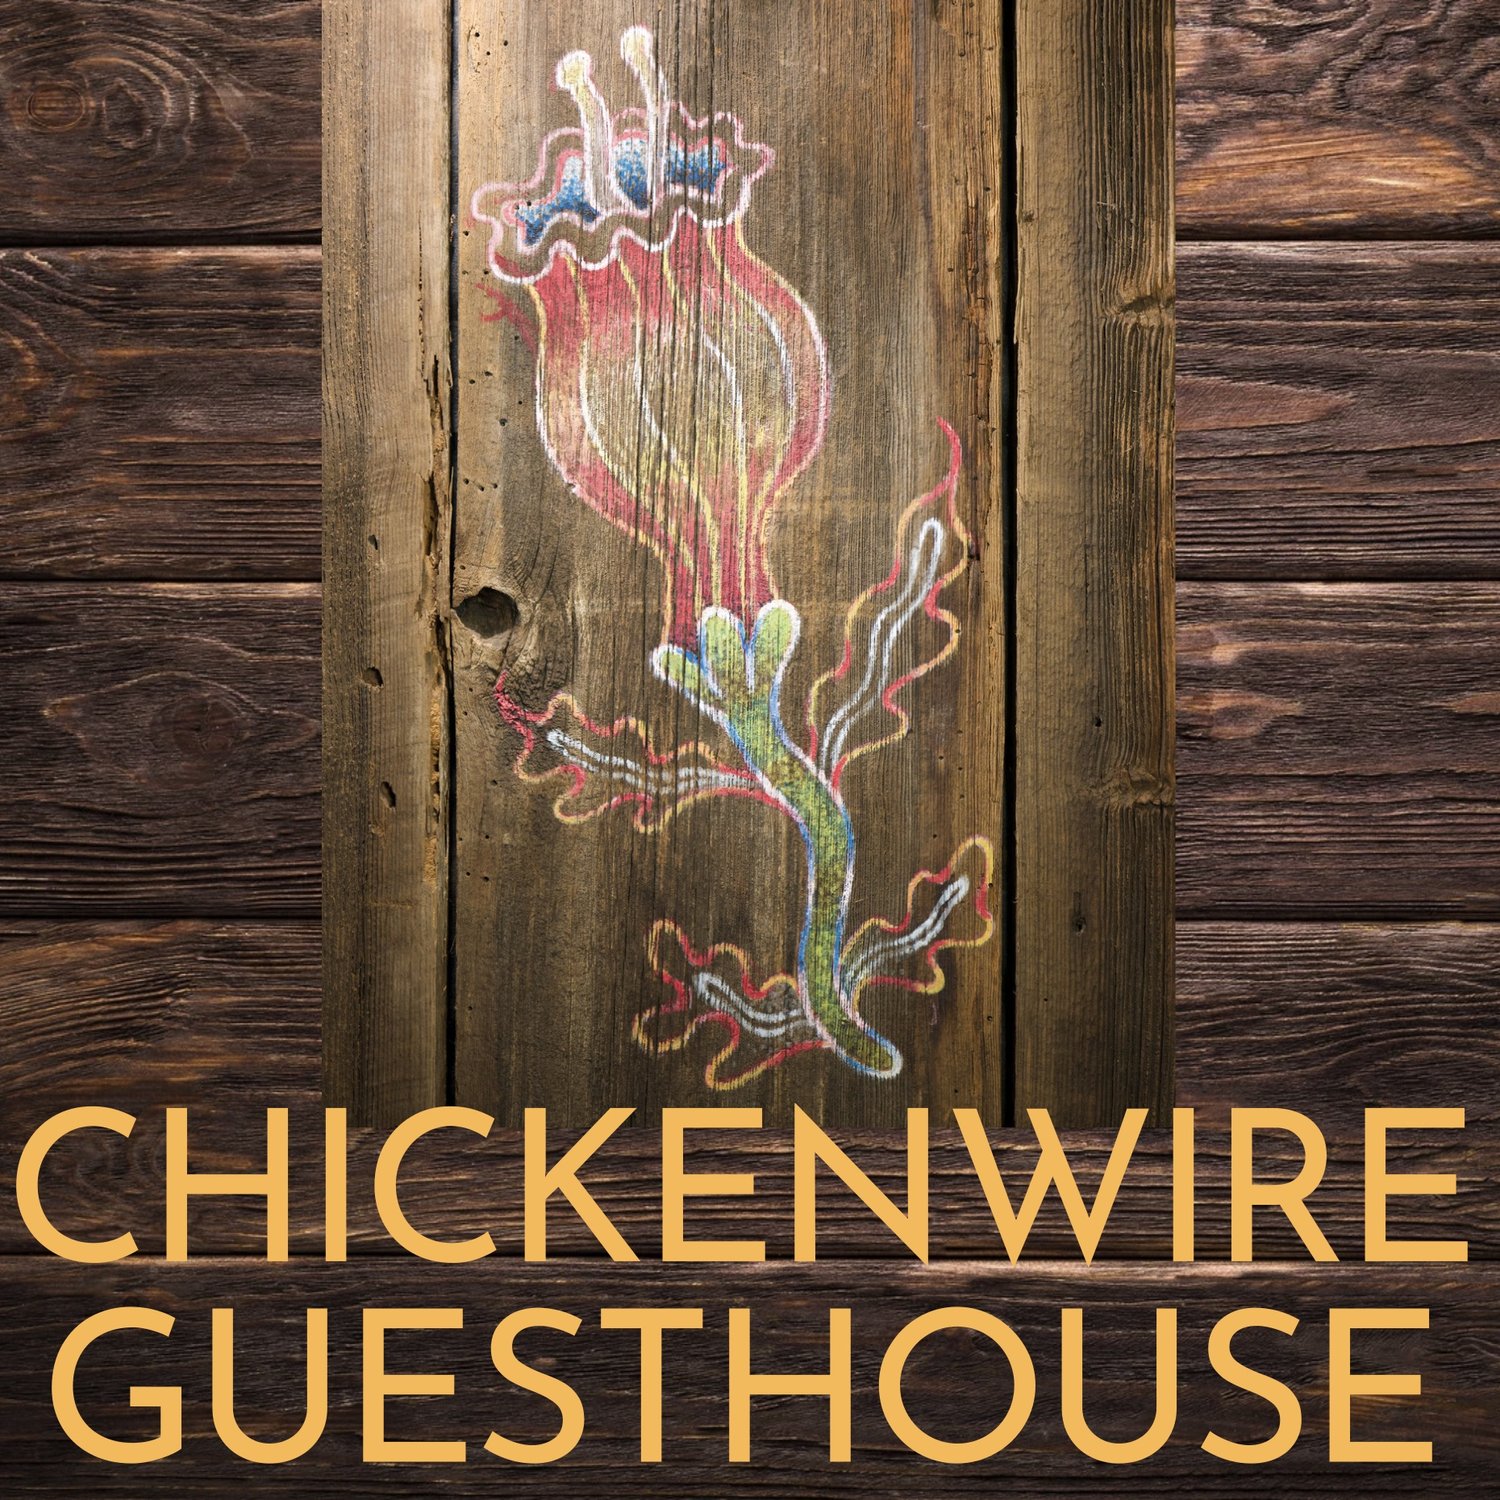 CHICKENWIRE GUESTHOUSE